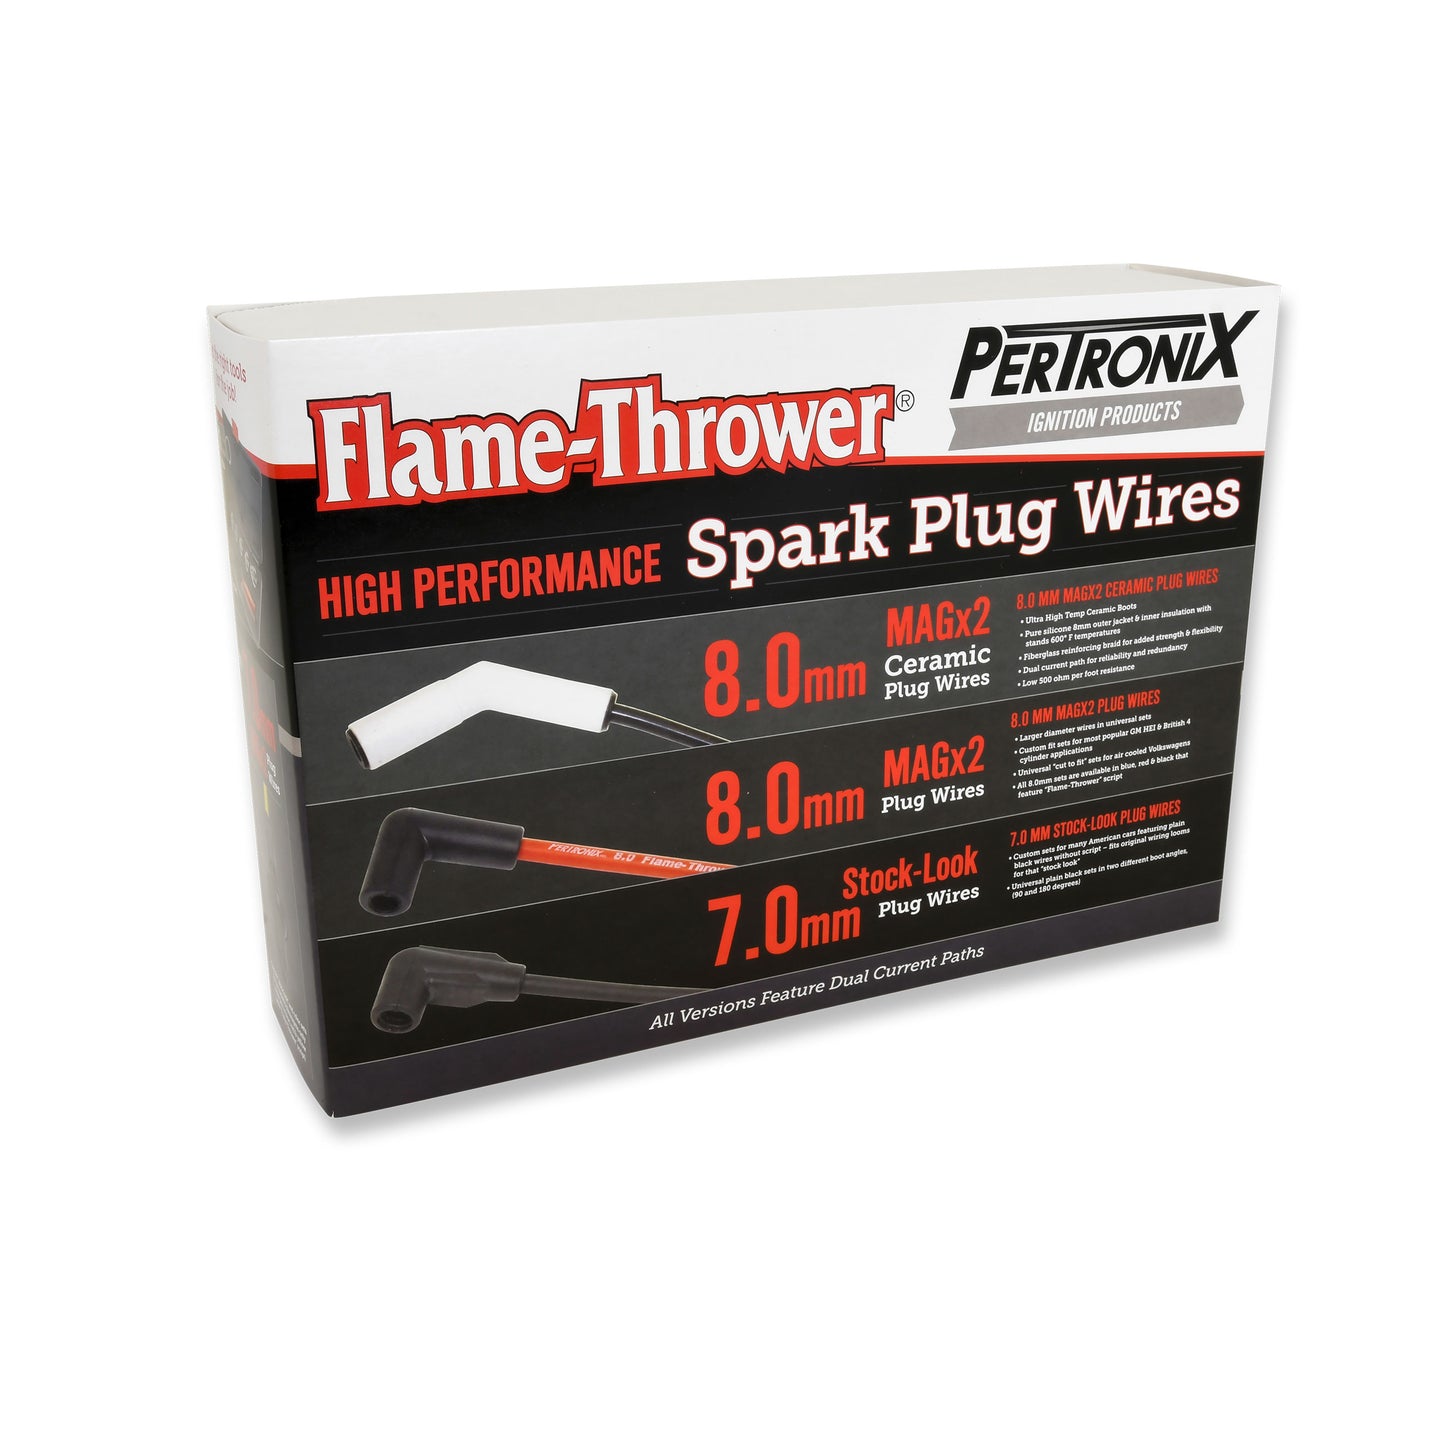 PerTronix 818280 Flame-Thrower Spark Plug Wires 8 cyl 8mm Universal LS 180 Degree Black